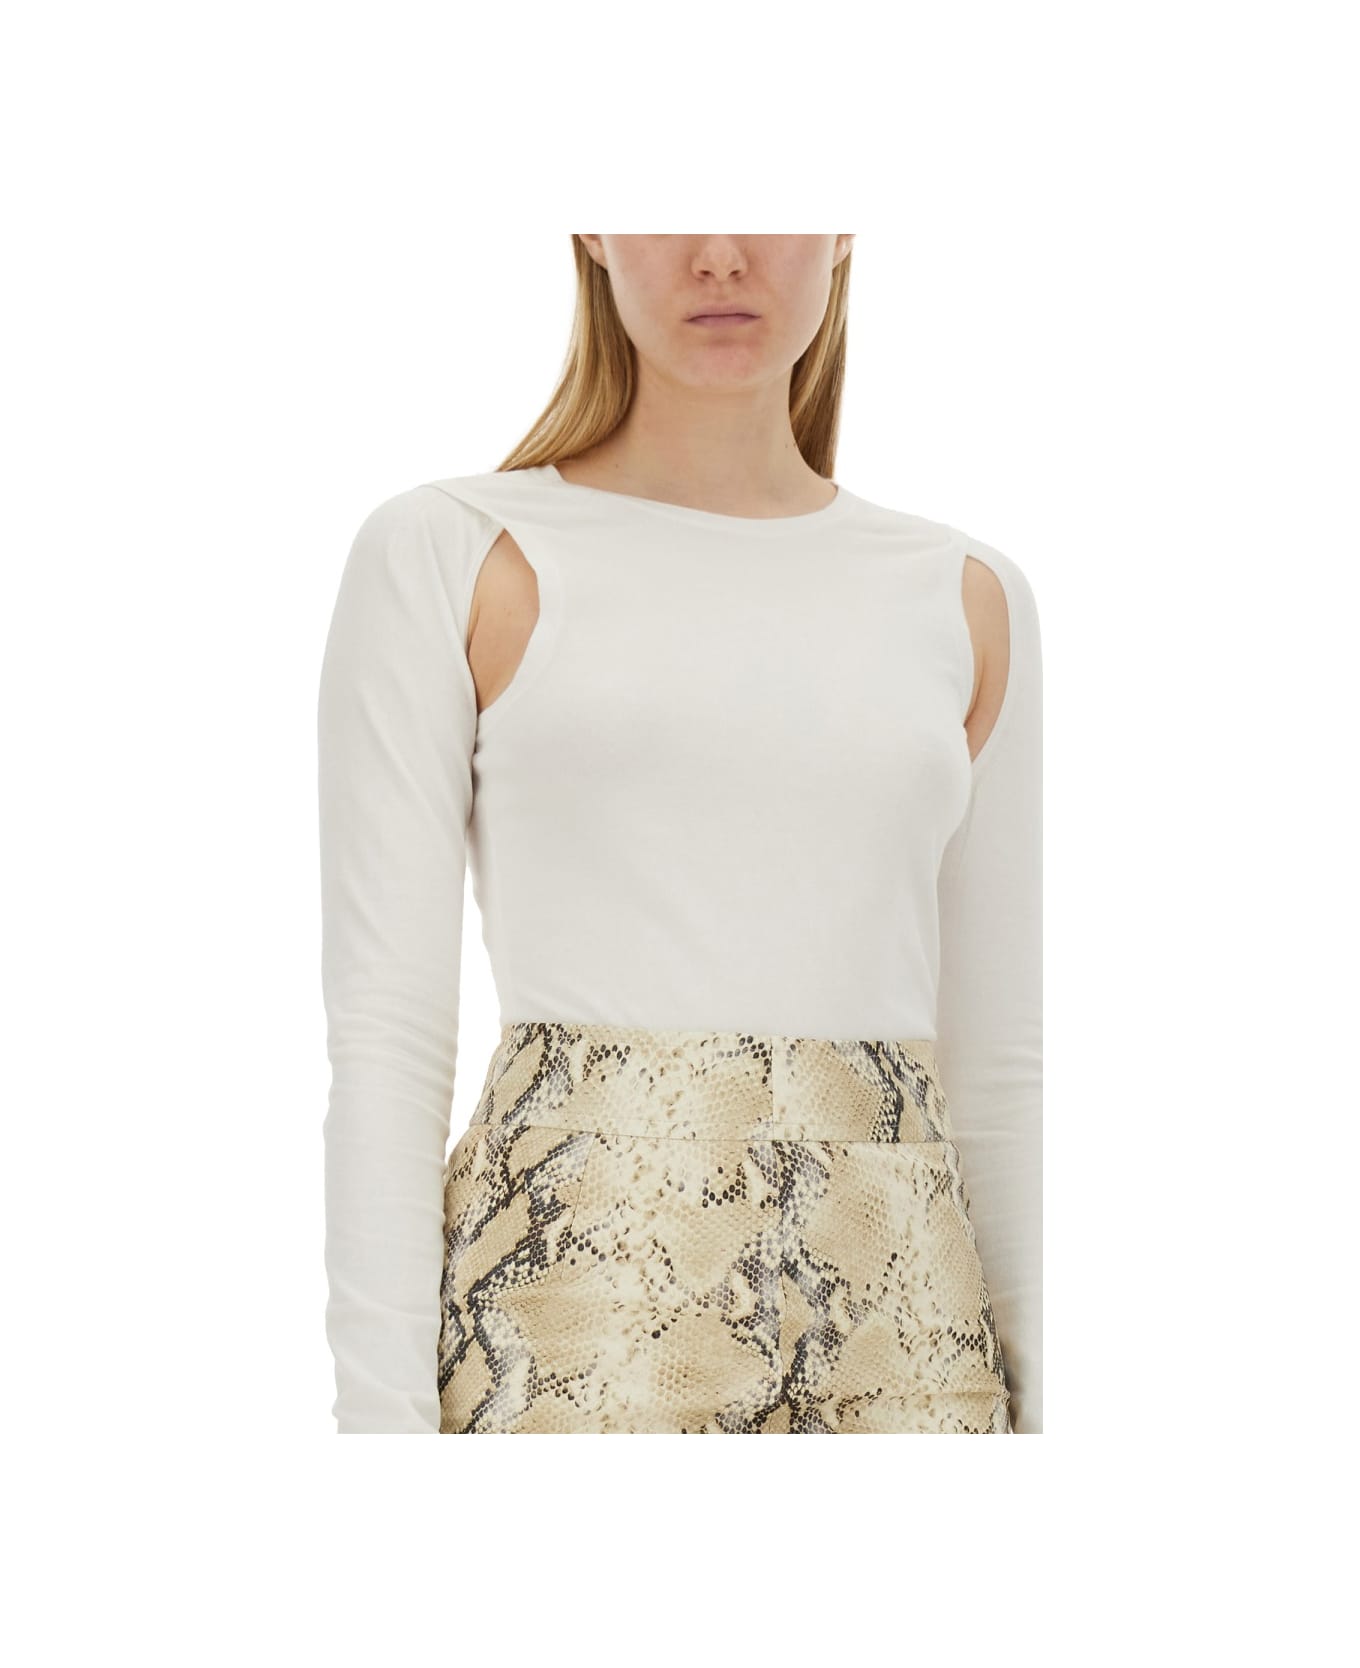 Helmut Lang Top Cut Out - WHITE